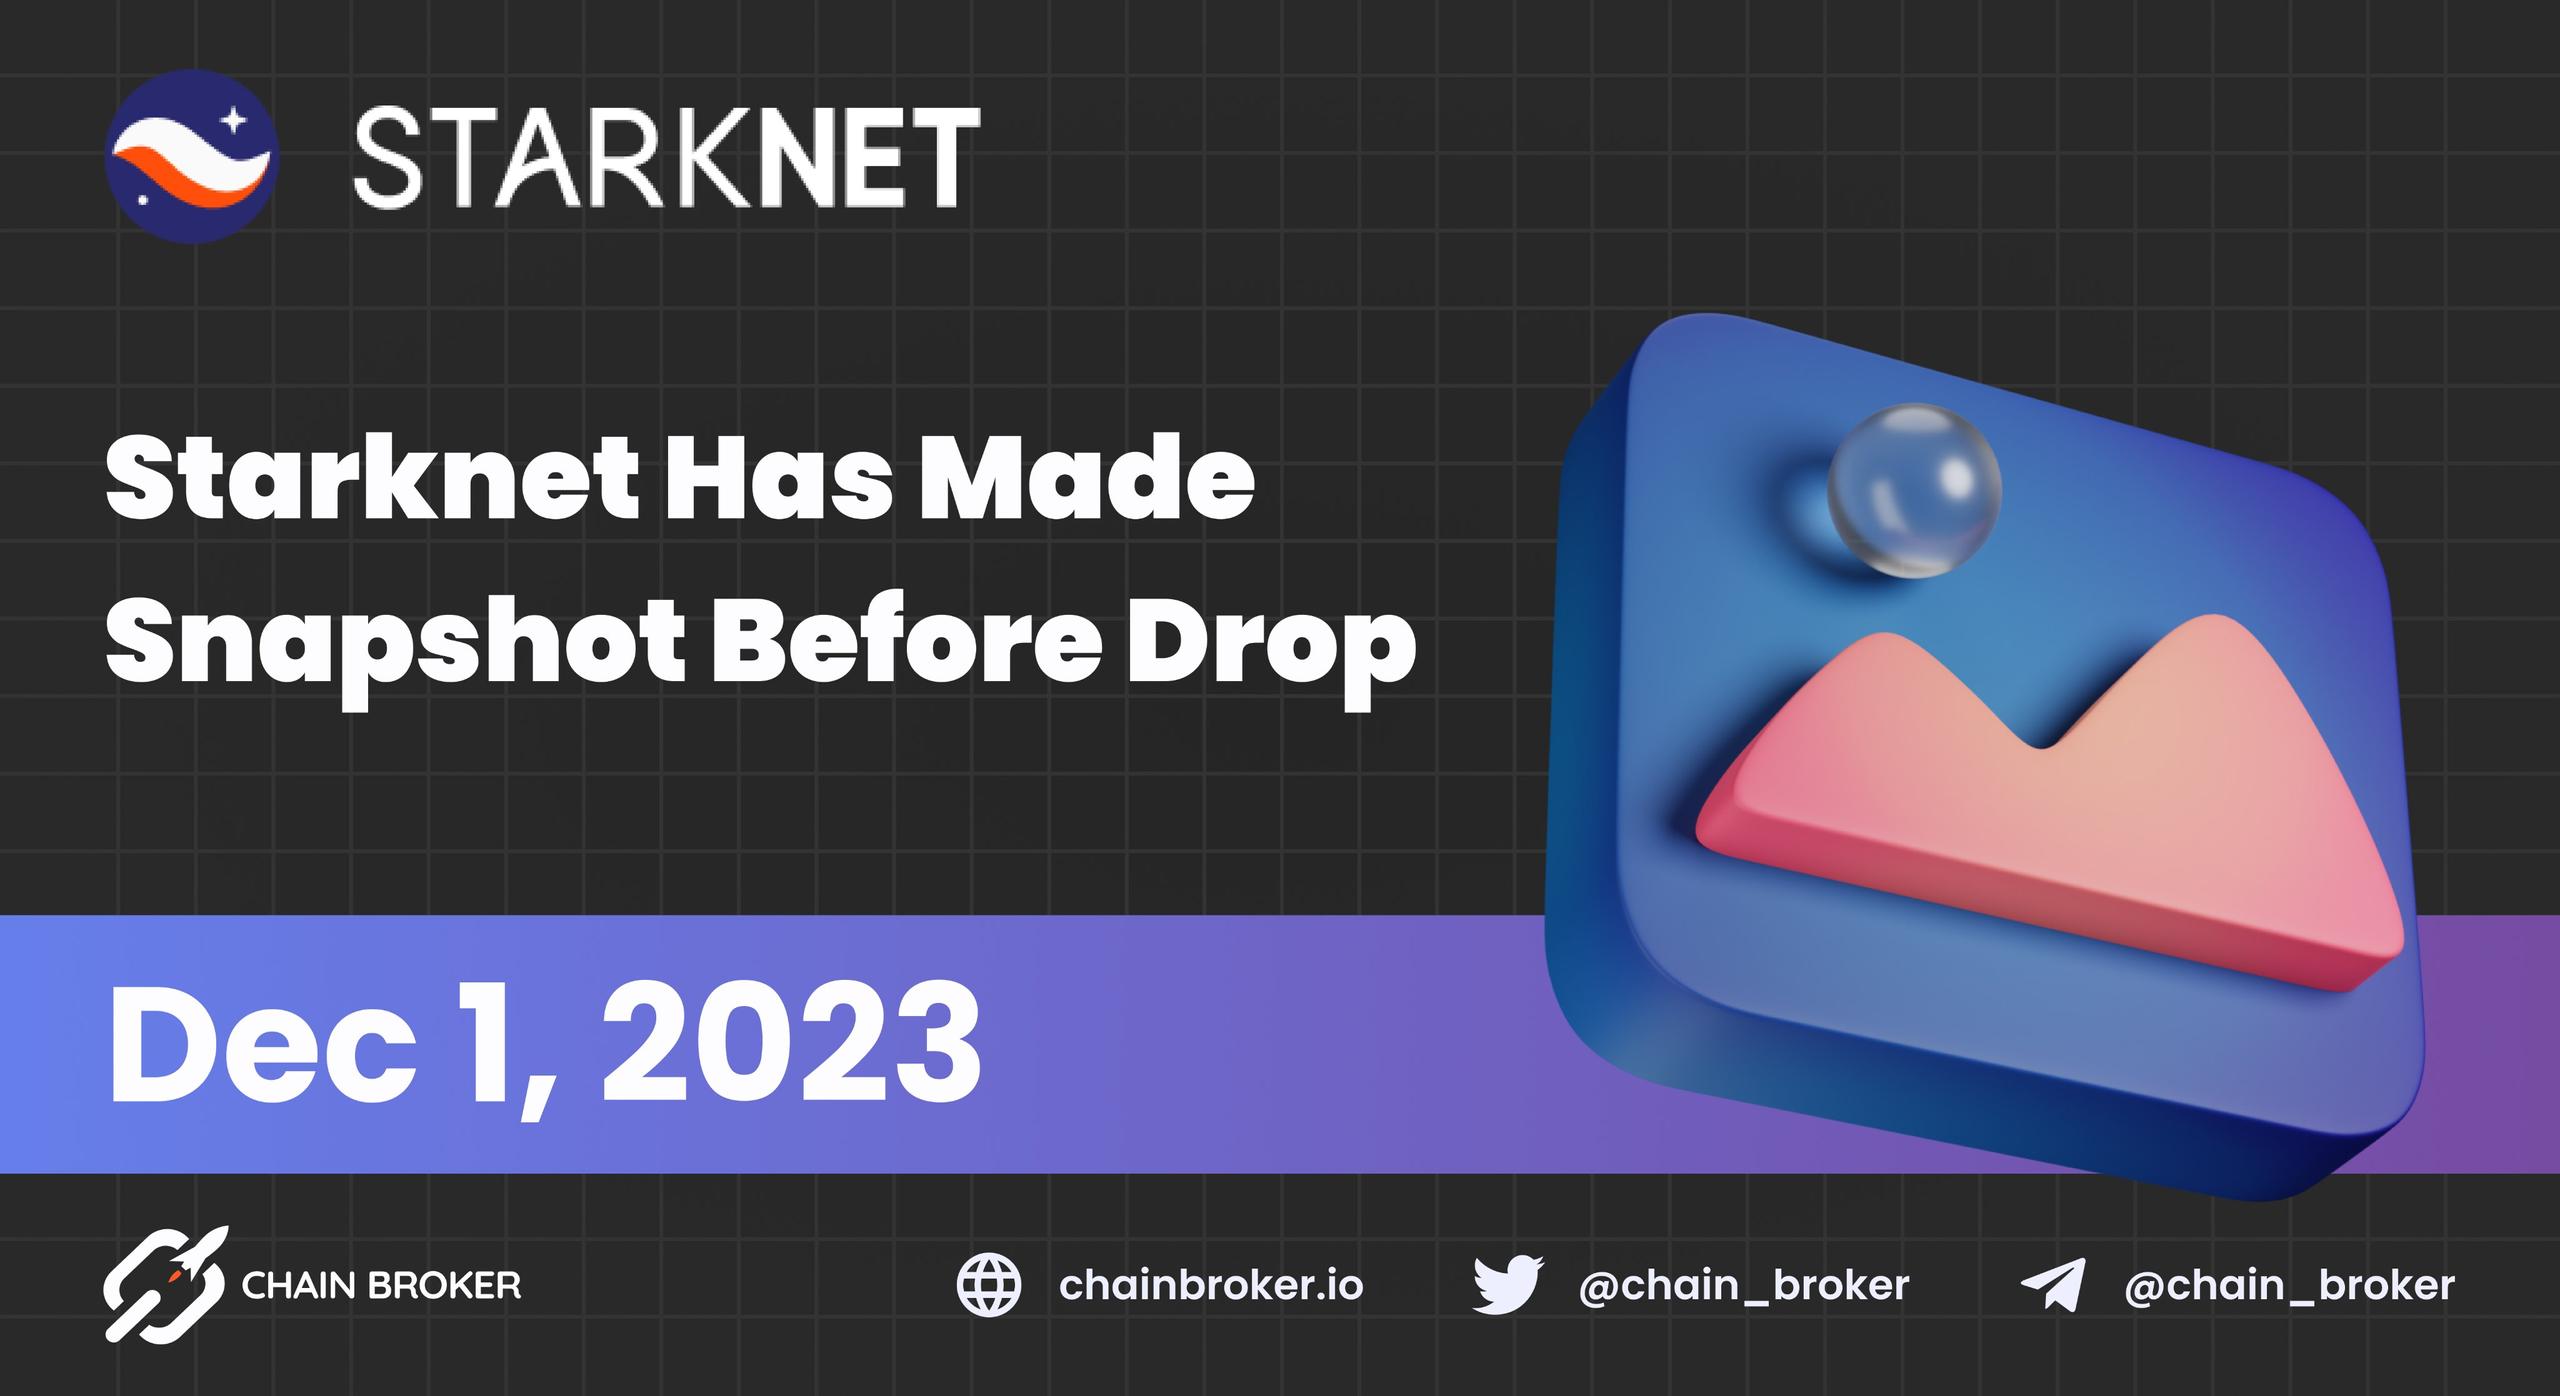 StarkNet has made a Snapshot for its coming Airdrop